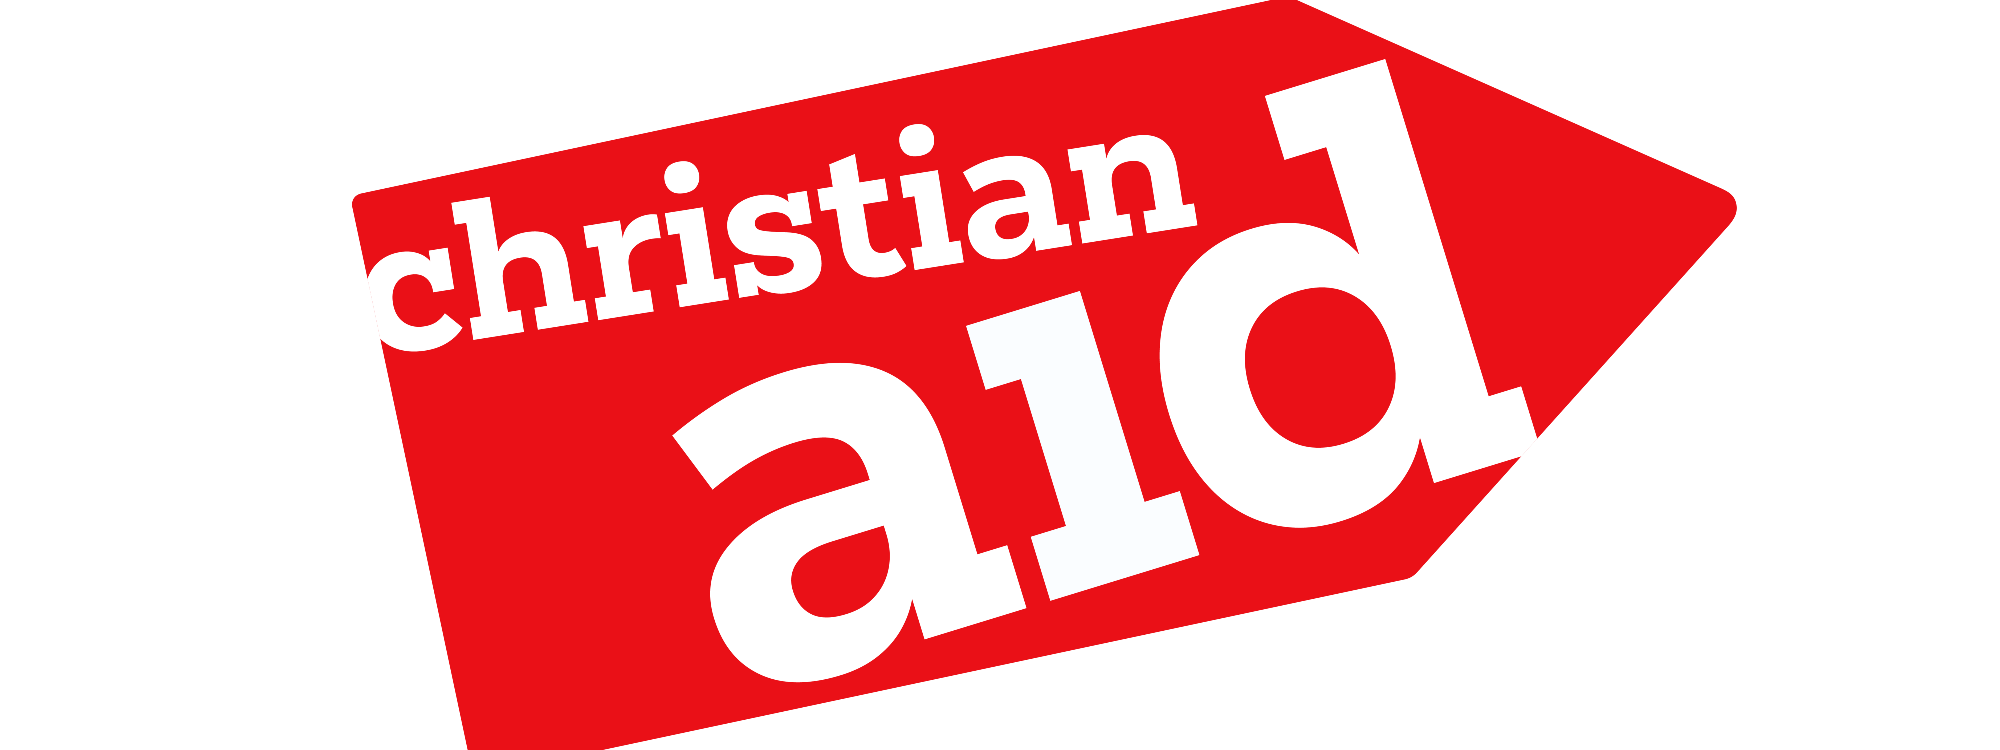 Christian Aid Week *
Coffee Morning Saturday 11 May at 10.00 am in the Methodist Church*
Details*